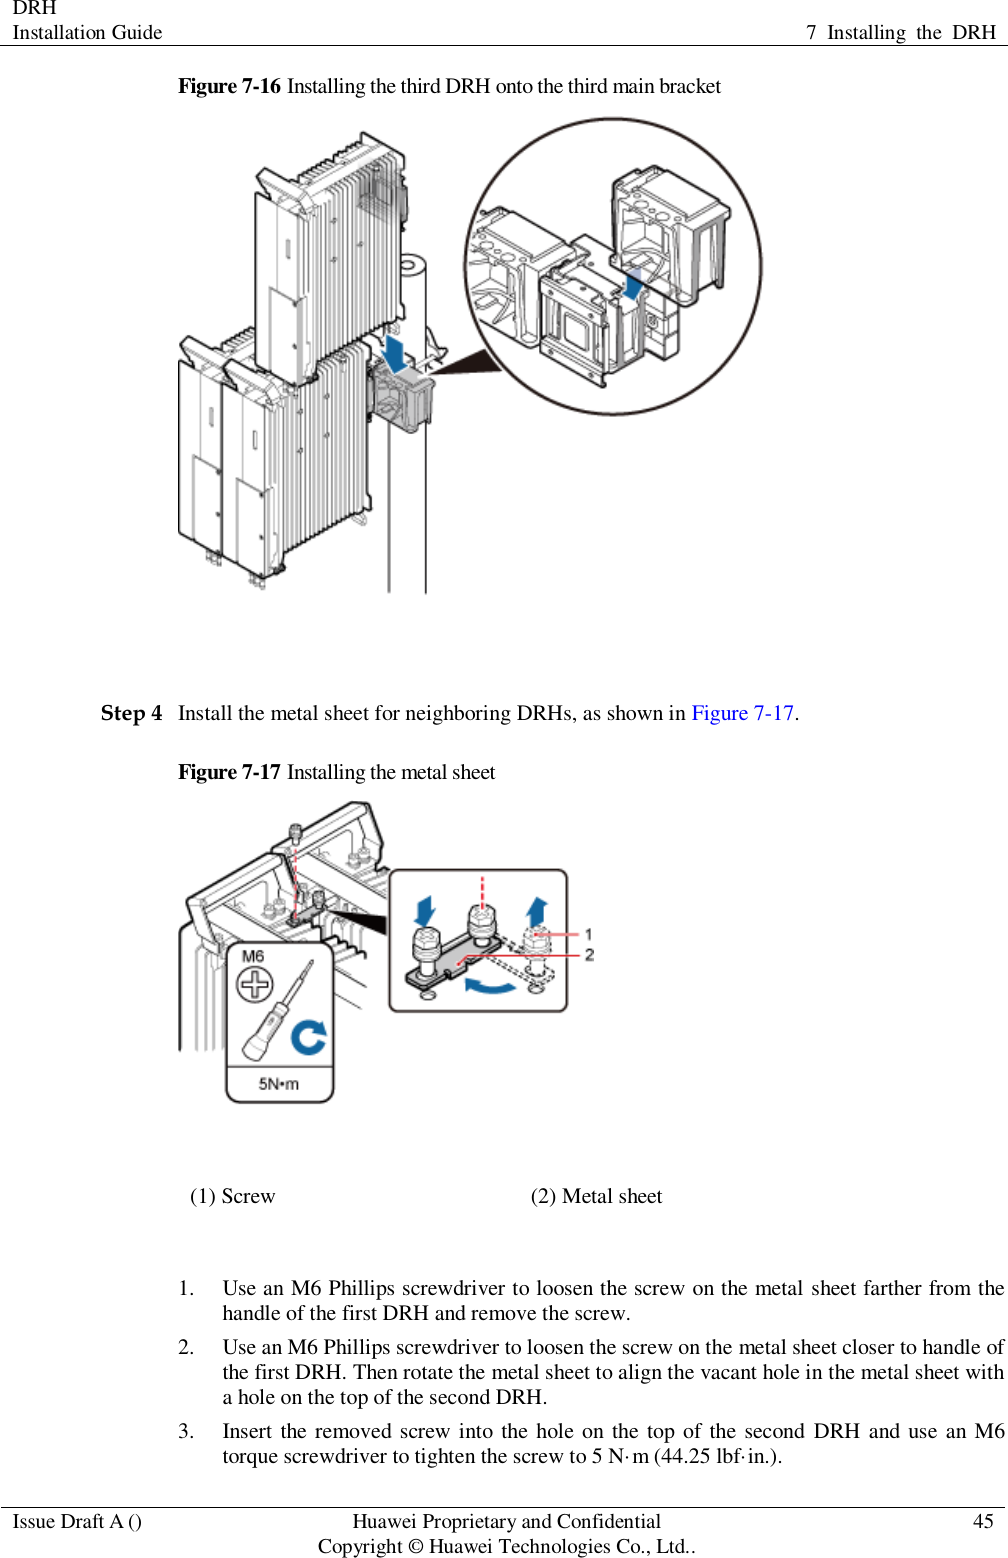 DRH   Installation Guide 7  Installing  the  DRH  Issue Draft A () Huawei Proprietary and Confidential                                     Copyright © Huawei Technologies Co., Ltd.. 45  Figure 7-16 Installing the third DRH onto the third main bracket   Step 4 Install the metal sheet for neighboring DRHs, as shown in Figure 7-17. Figure 7-17 Installing the metal sheet  (1) Screw (2) Metal sheet  1. Use an M6 Phillips screwdriver to loosen the screw on the metal sheet farther from the handle of the first DRH and remove the screw. 2. Use an M6 Phillips screwdriver to loosen the screw on the metal sheet closer to handle of the first DRH. Then rotate the metal sheet to align the vacant hole in the metal sheet with a hole on the top of the second DRH. 3. Insert the removed  screw into  the hole on the top of the second  DRH  and use an M6 torque screwdriver to tighten the screw to 5 N·m (44.25 lbf·in.). 